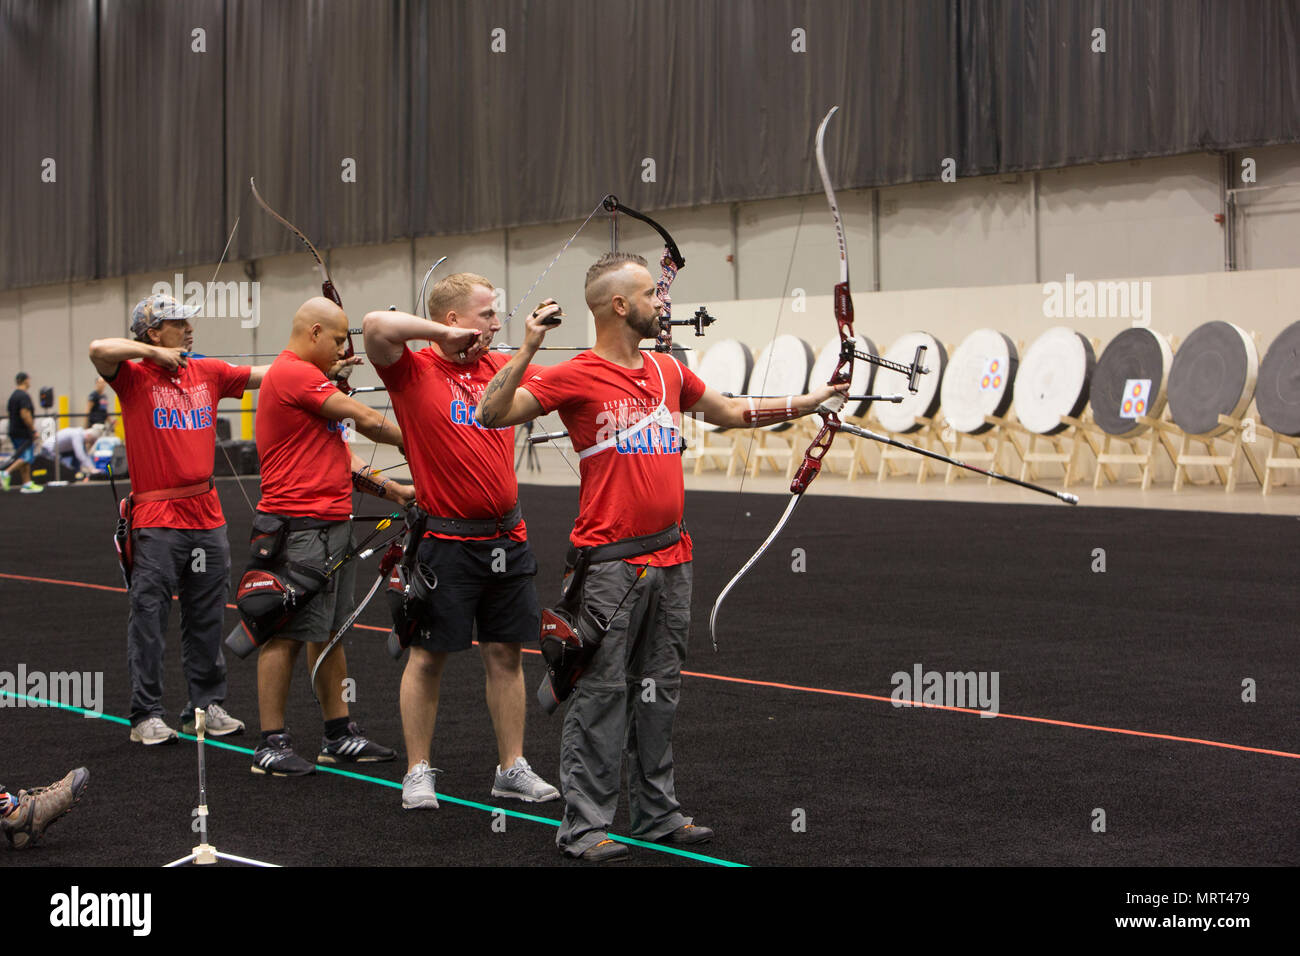 2017 DoD Warrior Games Team Marine Corps archers send arrows downrange during a Warrior Games practice at McCormick Place in Chicago, June 29, 2017. The Warrior Games is an adaptive sports competition for wounded, ill and injured service members and veterans. (U.S. Marine Corps photo by Lance Cpl. Nadia J. Stark) Stock Photo